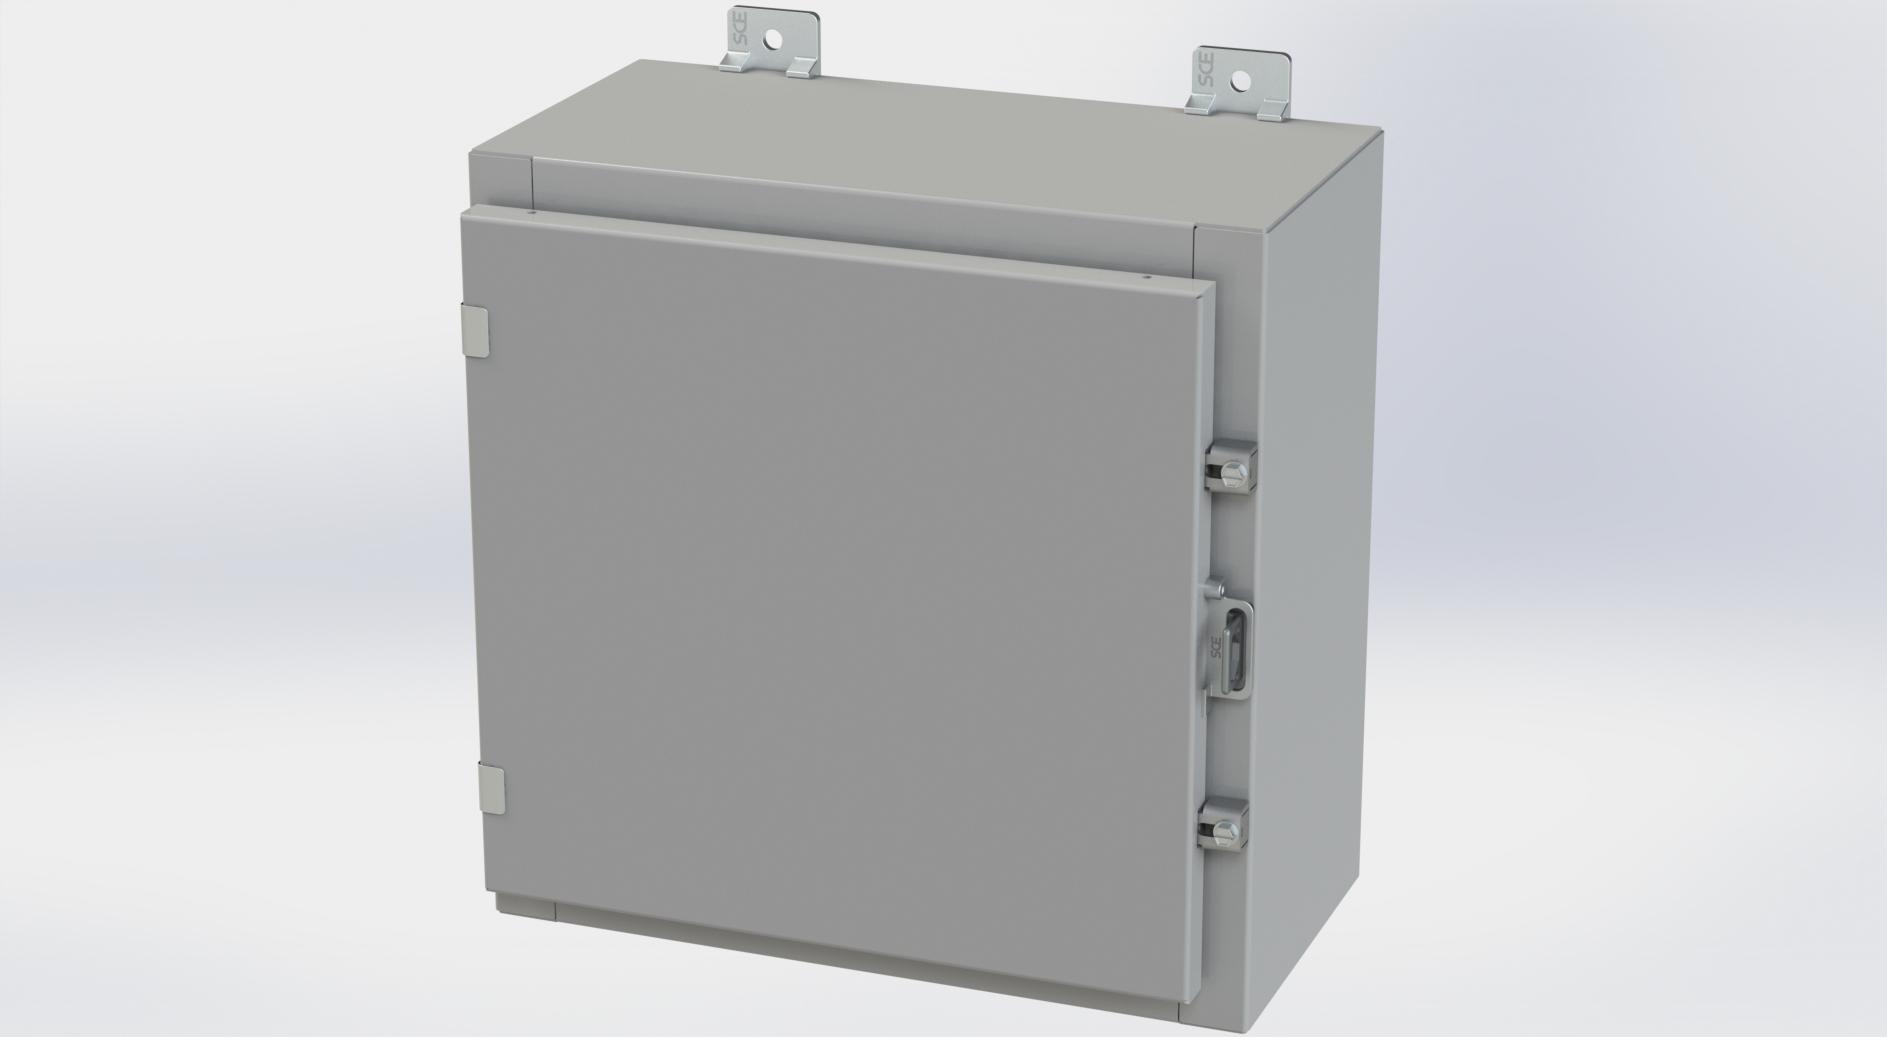 Saginaw Control SCE-16H1608LP Nema 4 LP Enclosure, Height:16.00", Width:16.00", Depth:8.00", ANSI-61 gray powder coating inside and out. Optional panels are powder coated white.